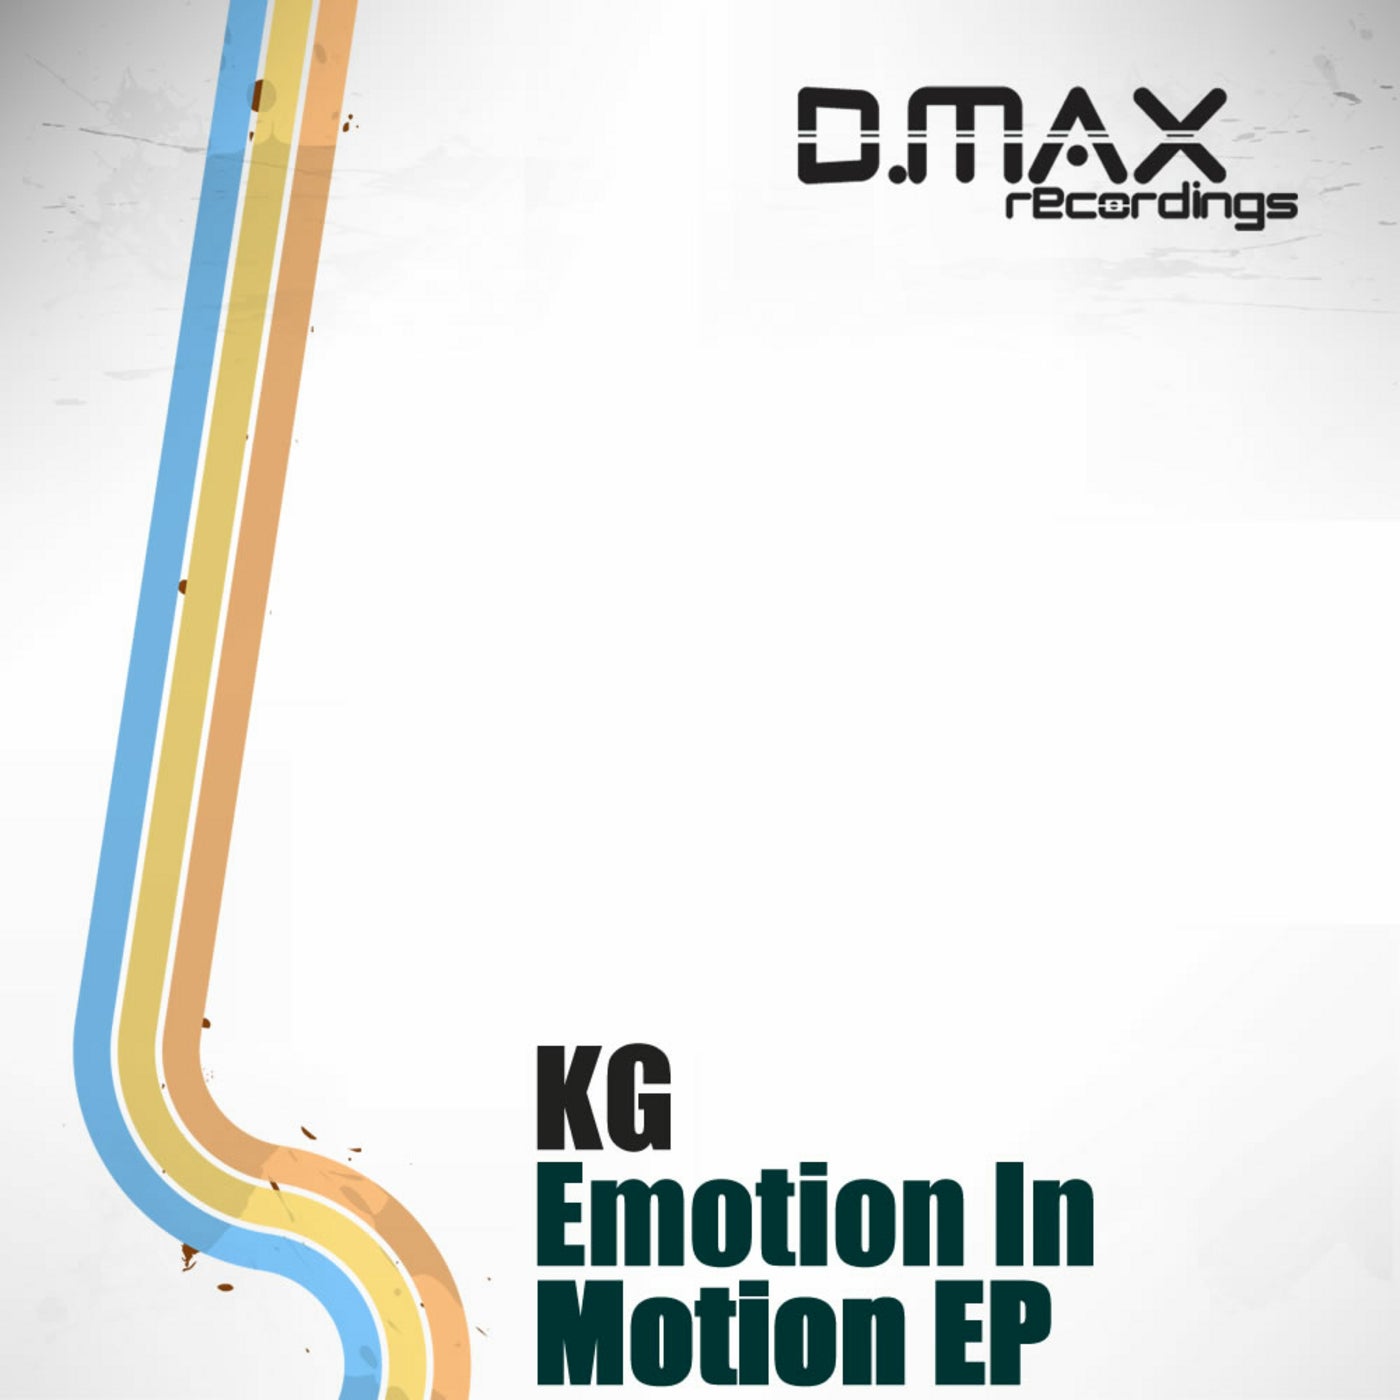 Emotion In Motion EP